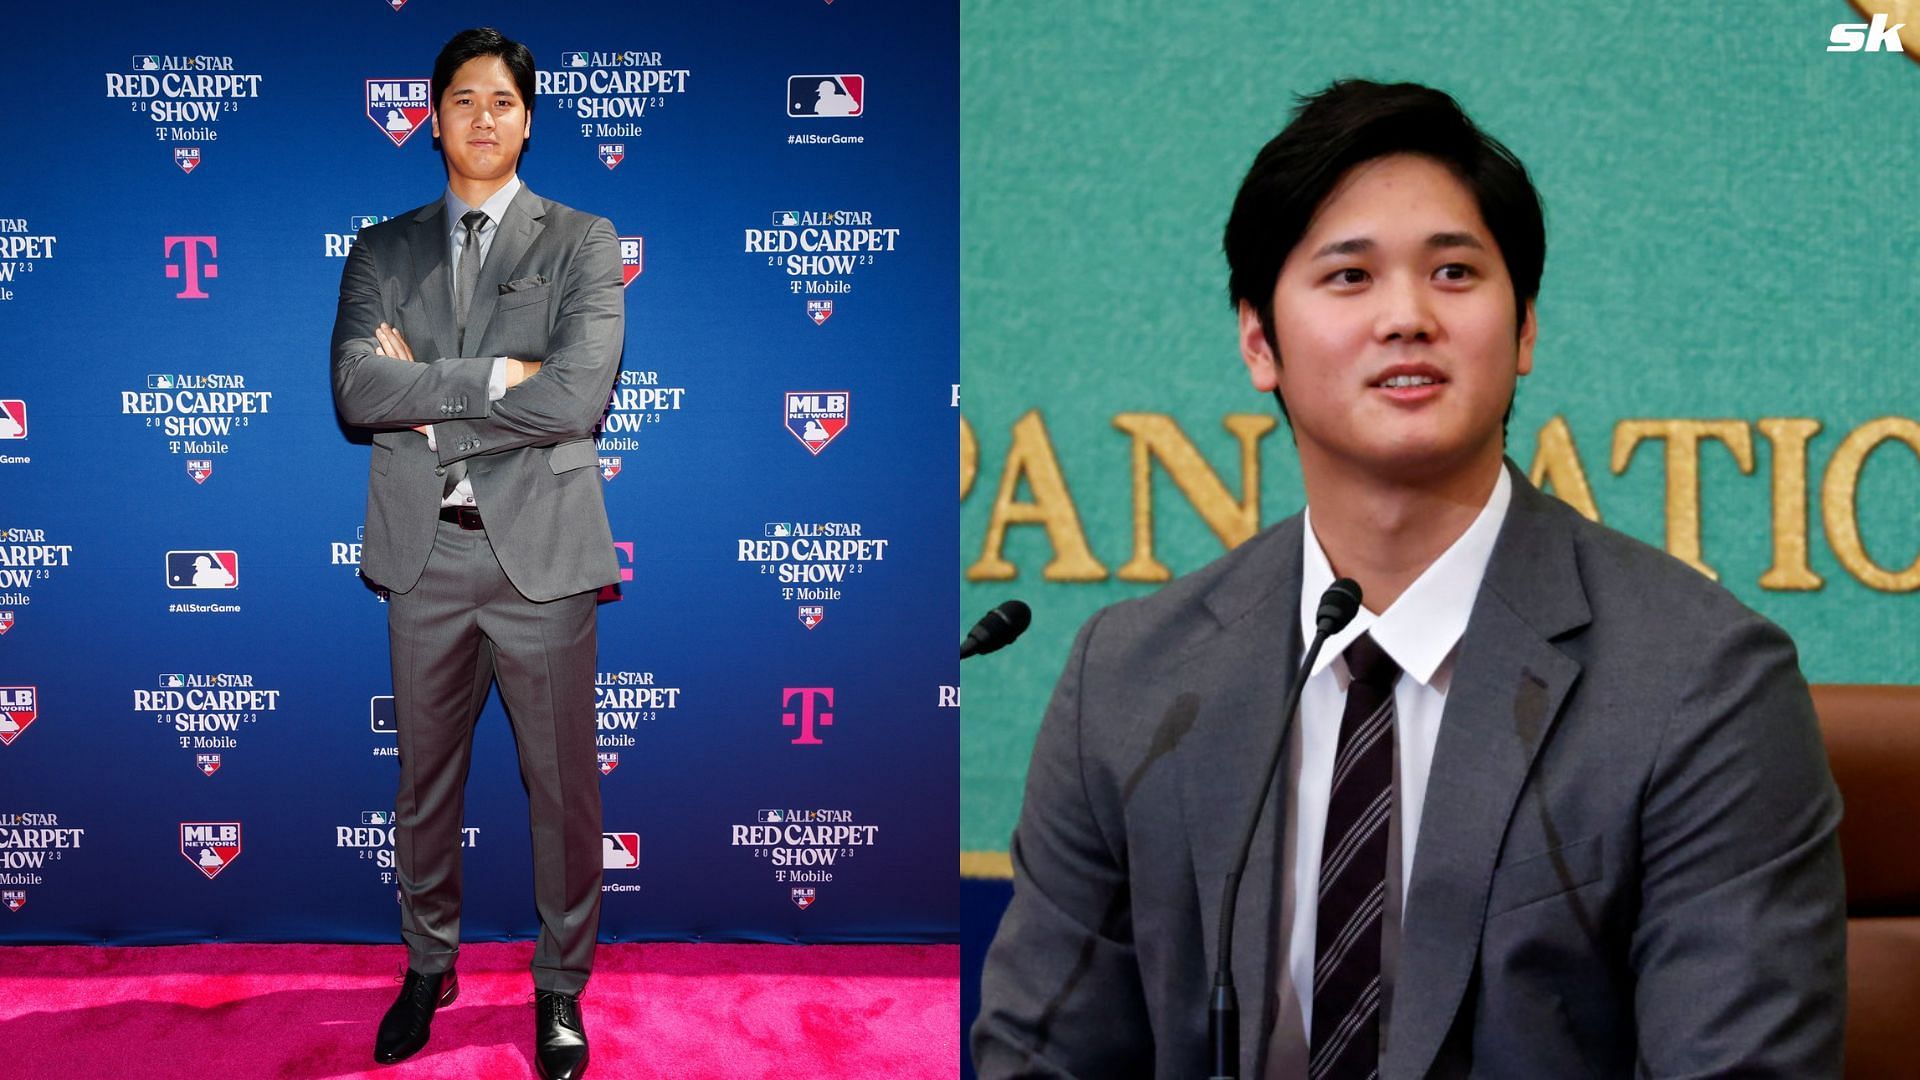 Shohei Ohtani looks dashing in suits 